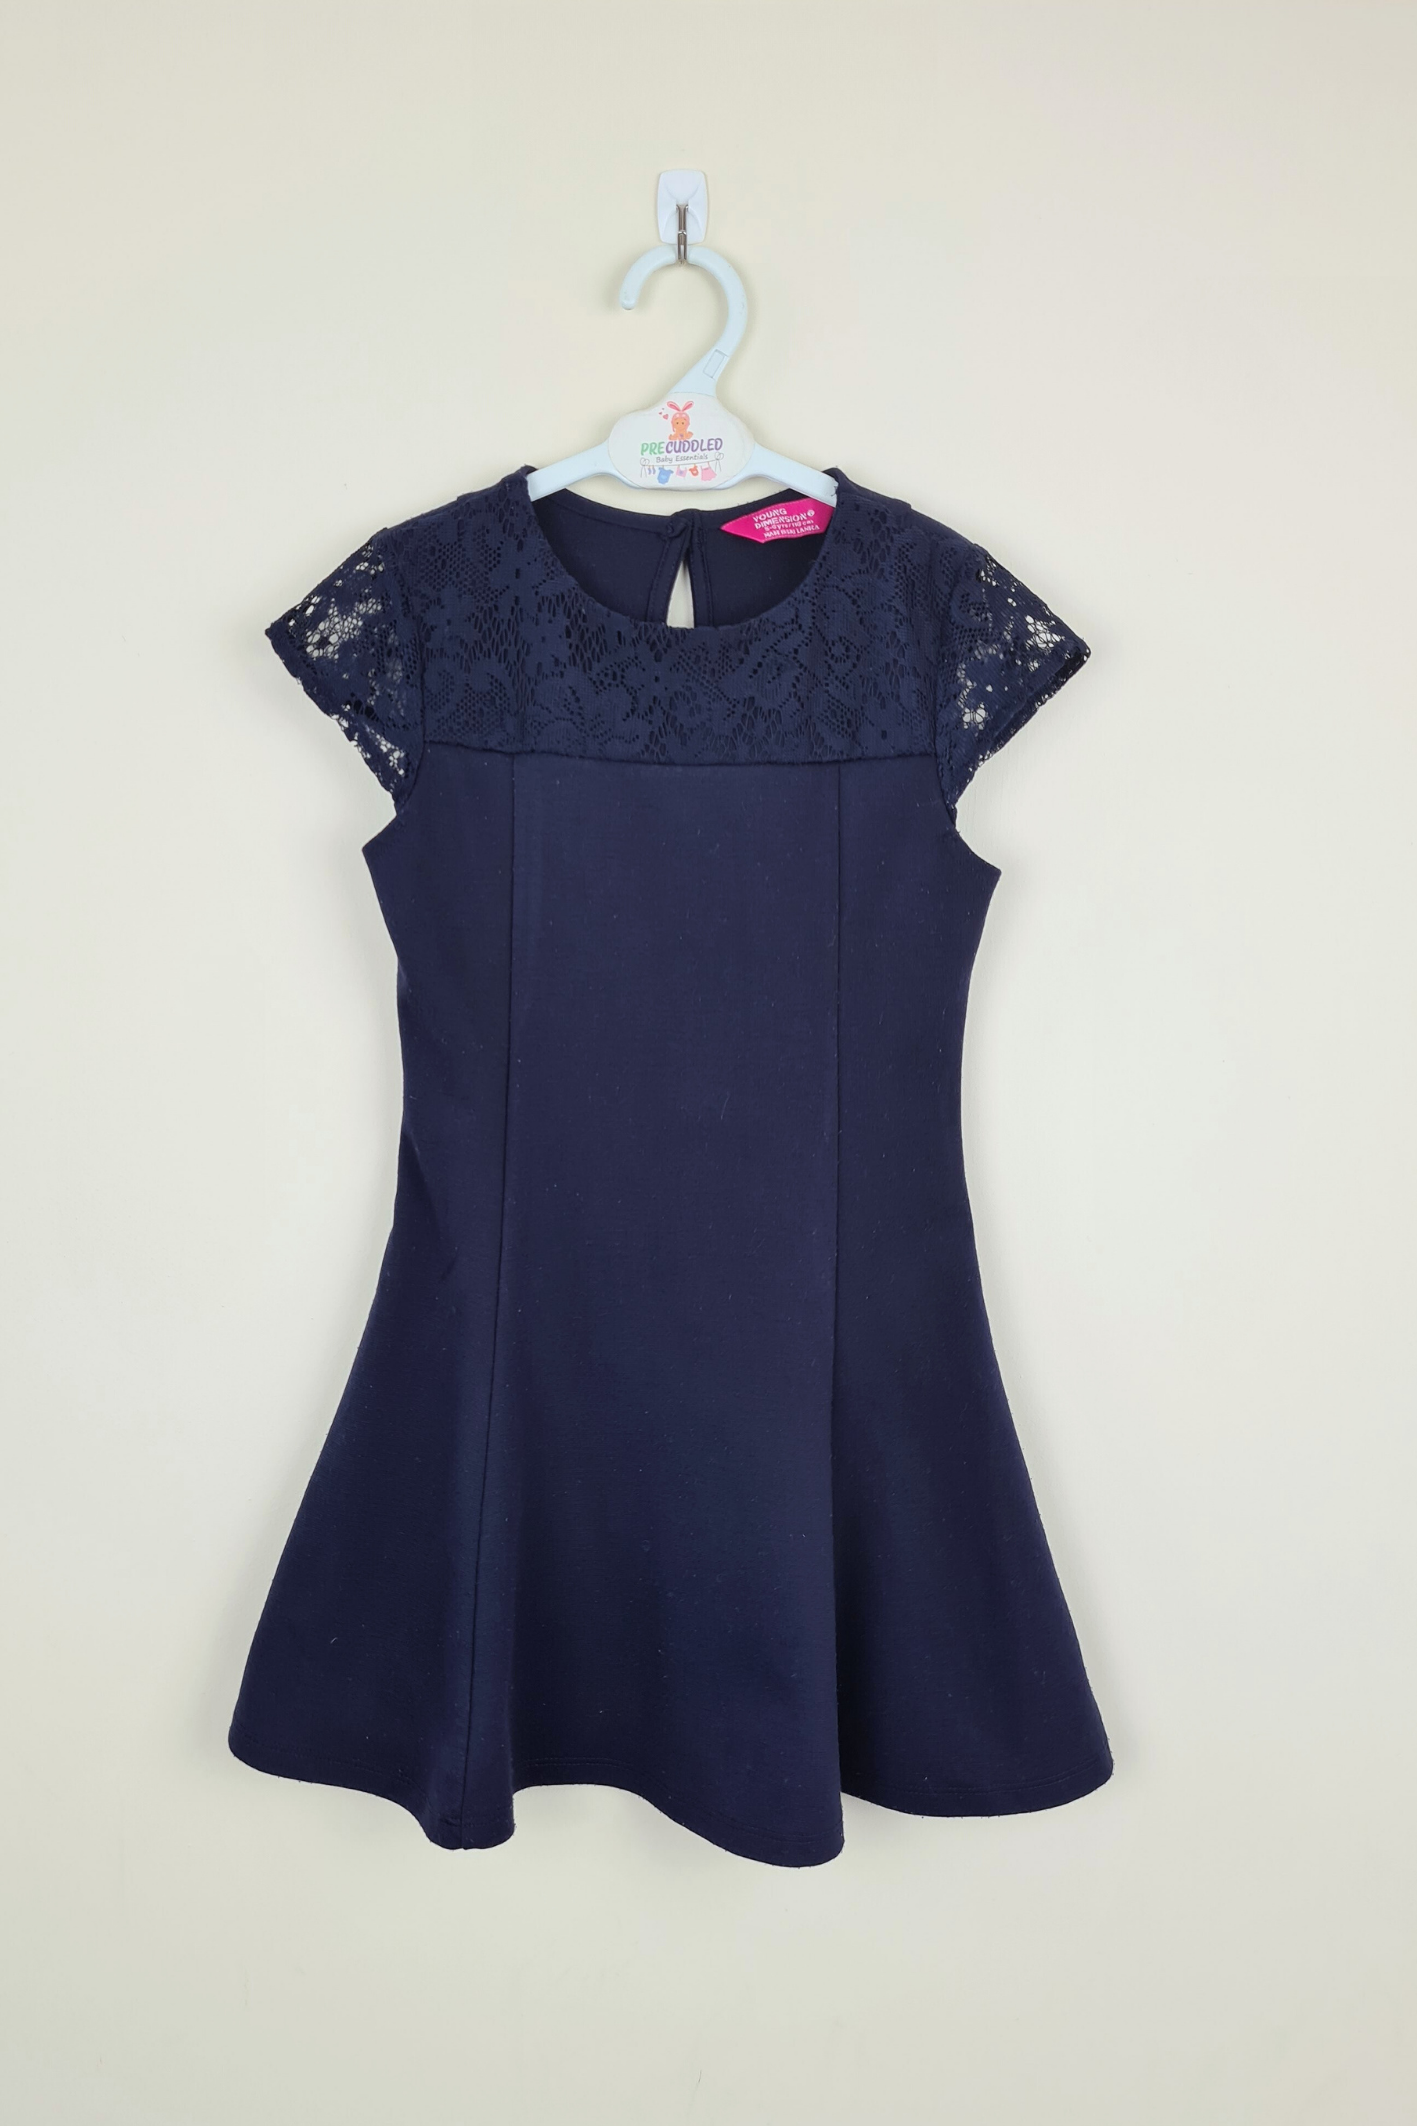 5-6y - Navy Dress (Joules)